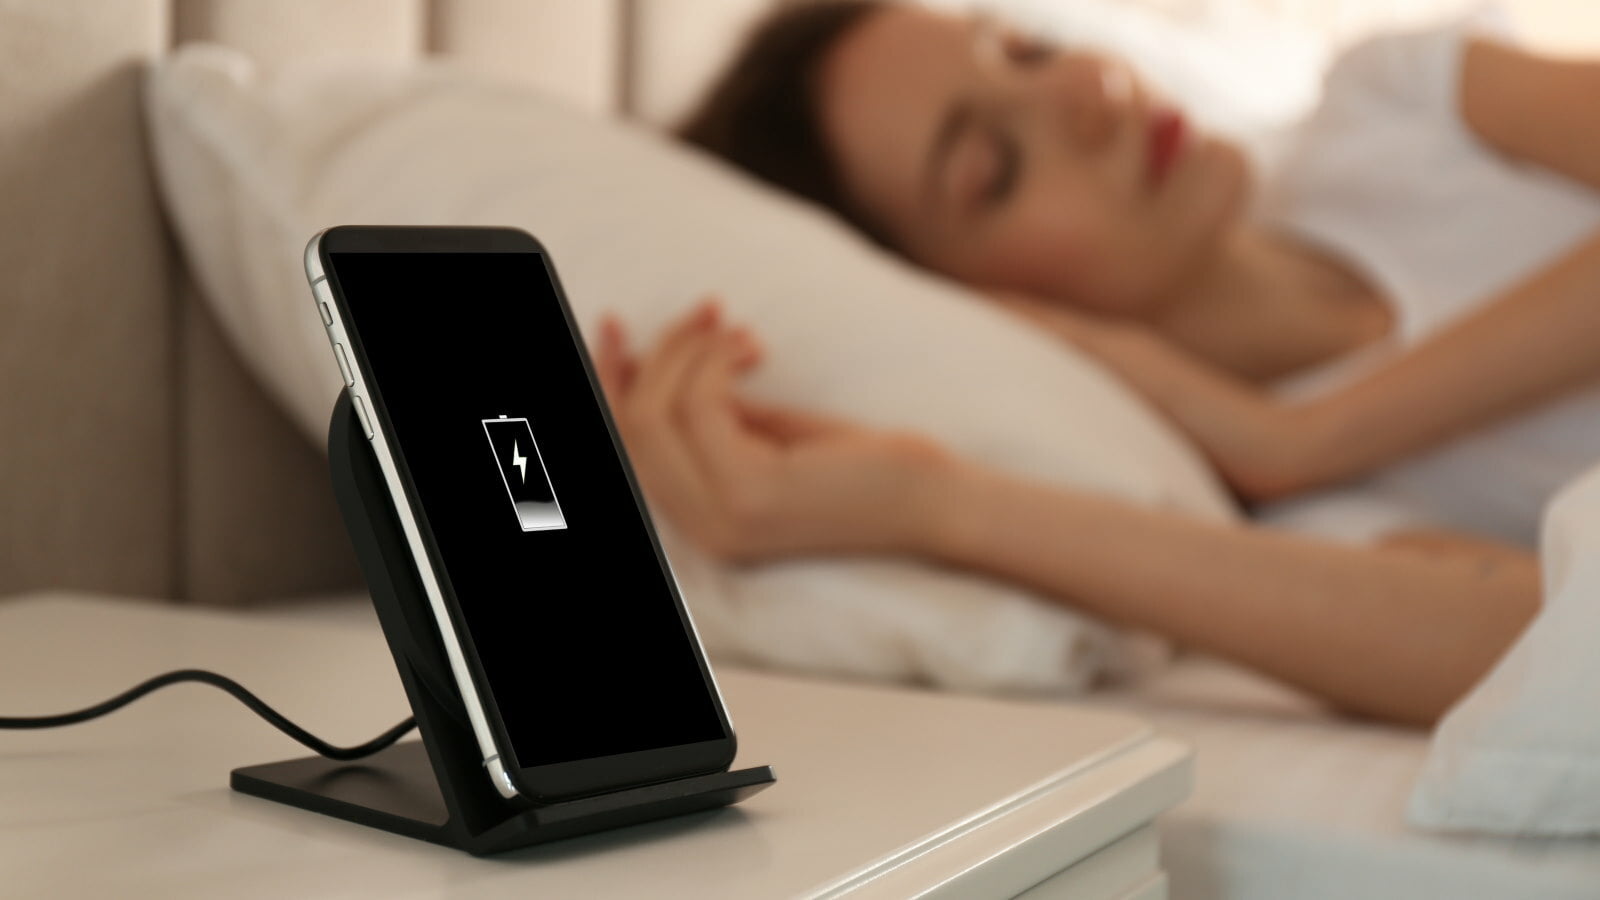 Sleeping with Your Phone Charging? Apple's Vital Safety Alert